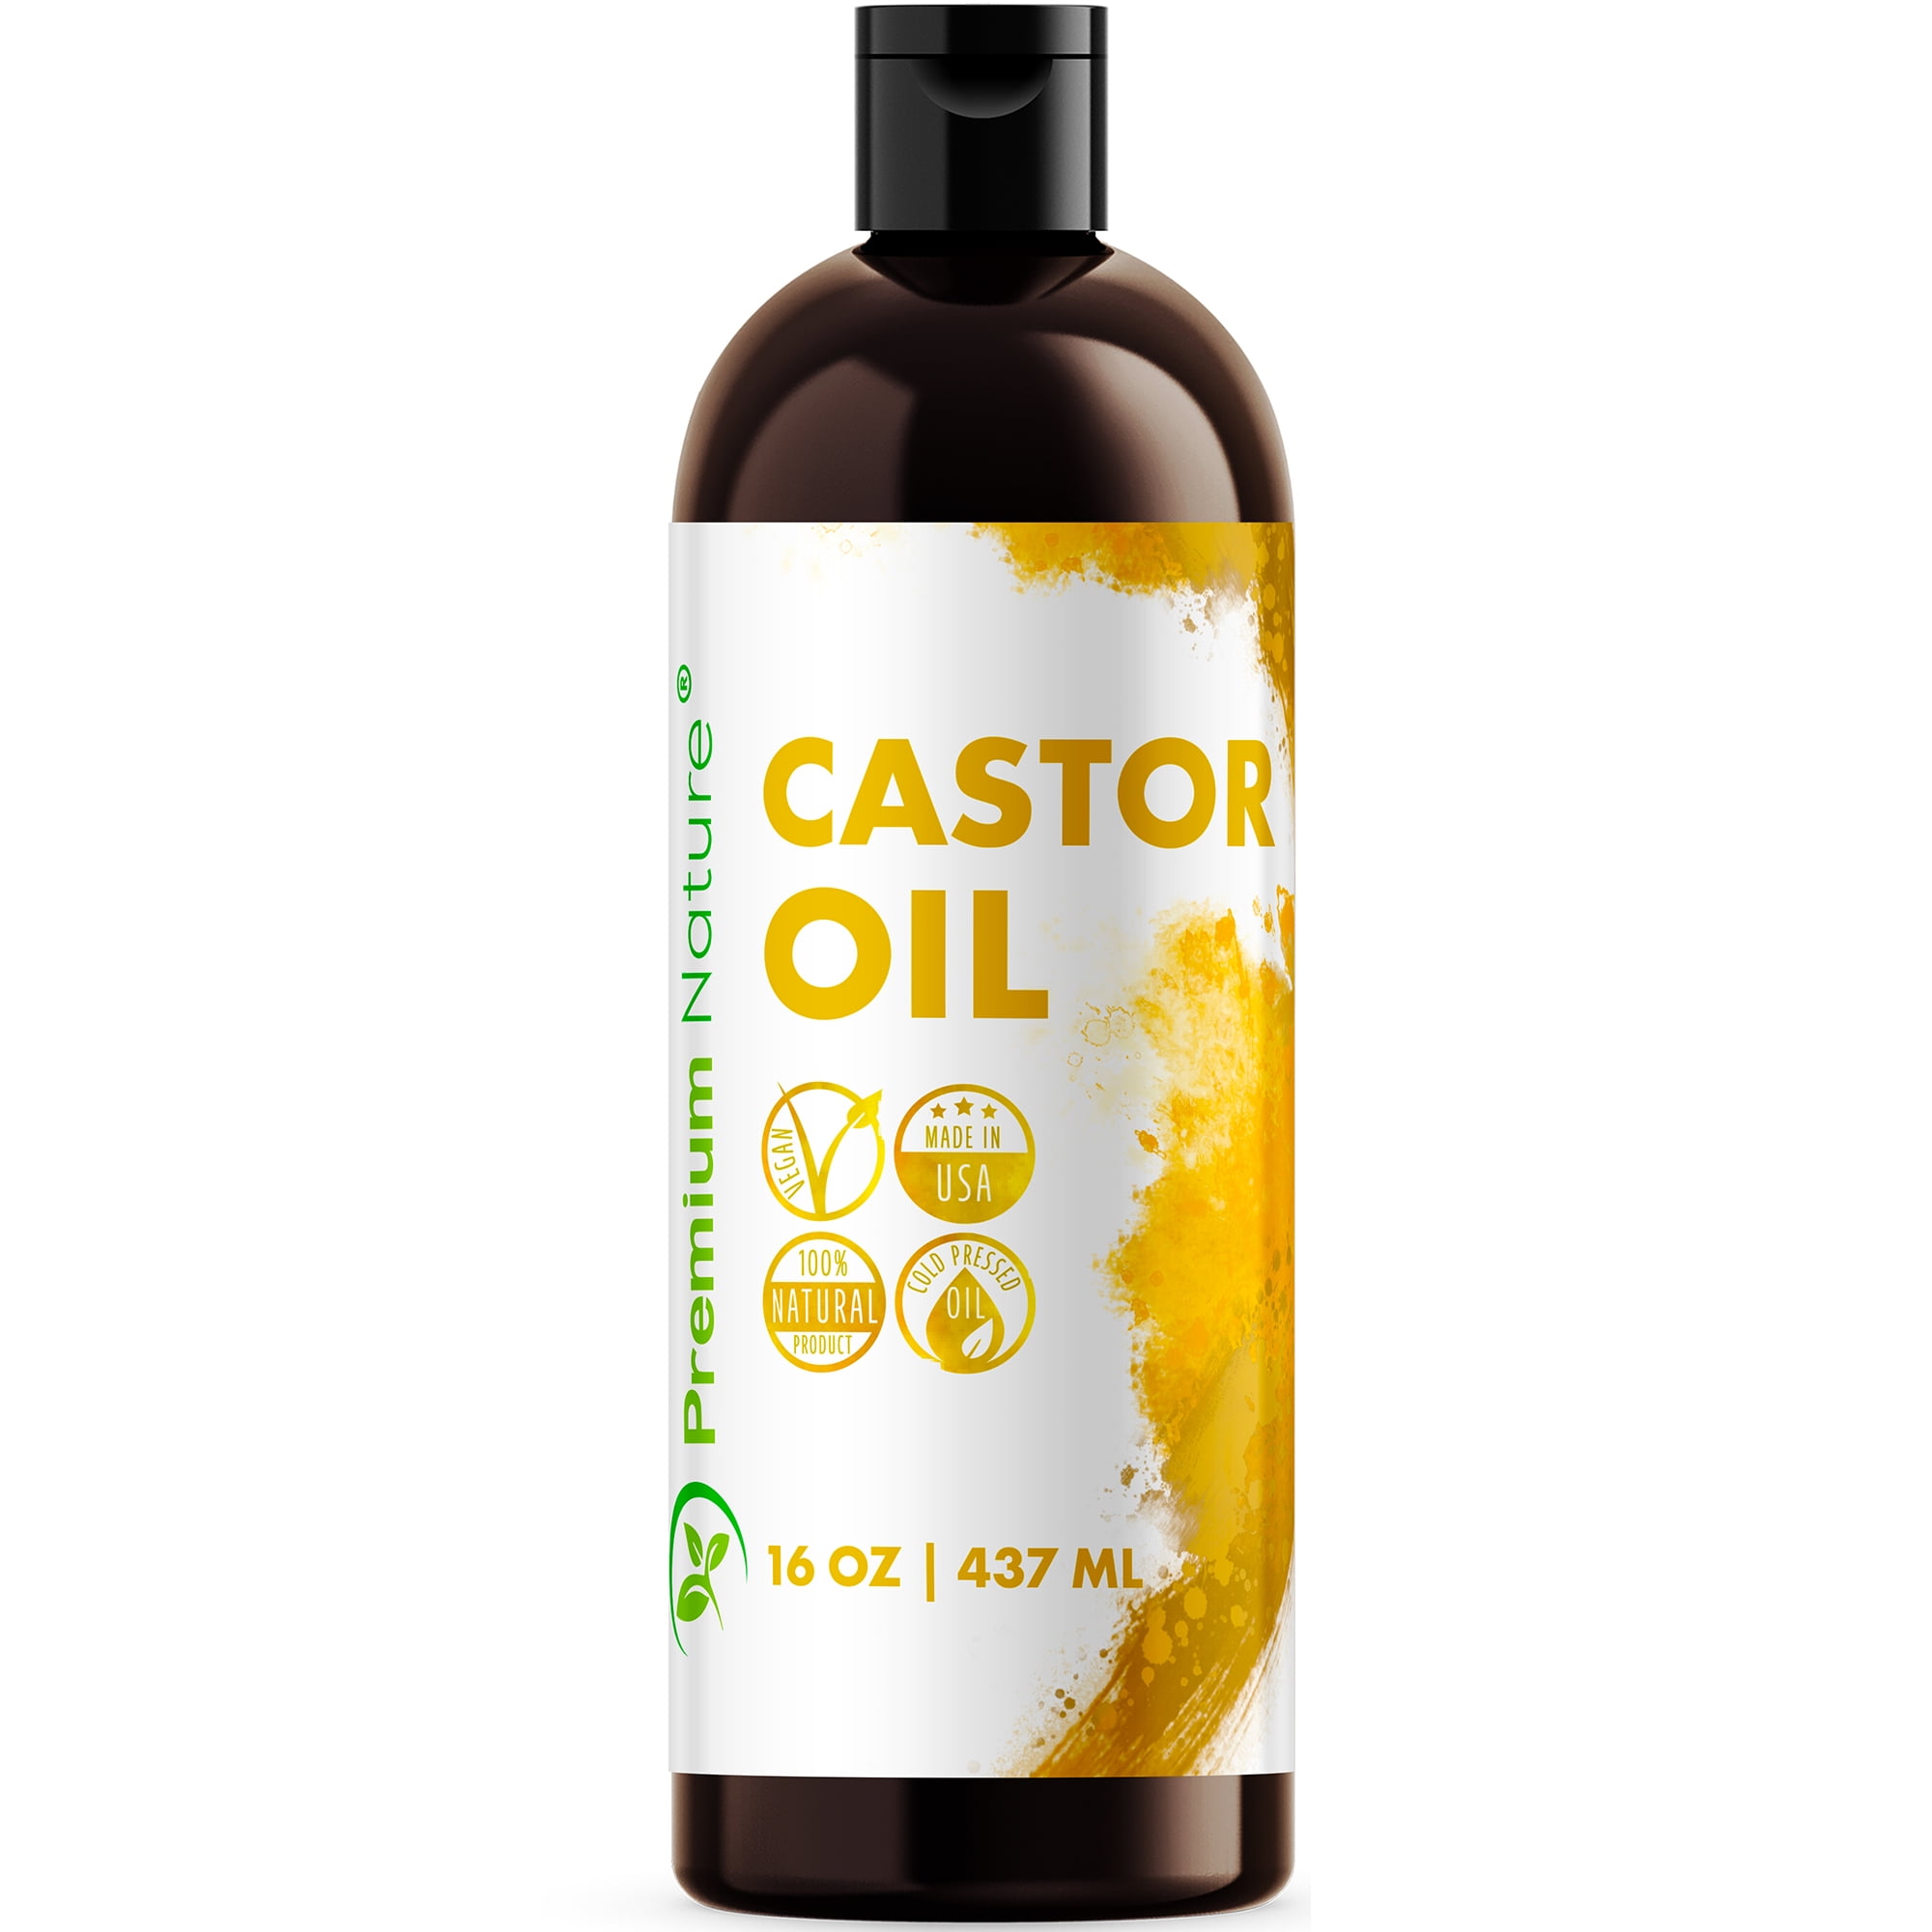 Castor Oil 16 oz - Carrier Oil, Stimulates Hair Growth, Conditions Hair, Heals Inflamed Skin, Nourishes & Moisturizes Skin, Fades Blemishes - By Premium Nature